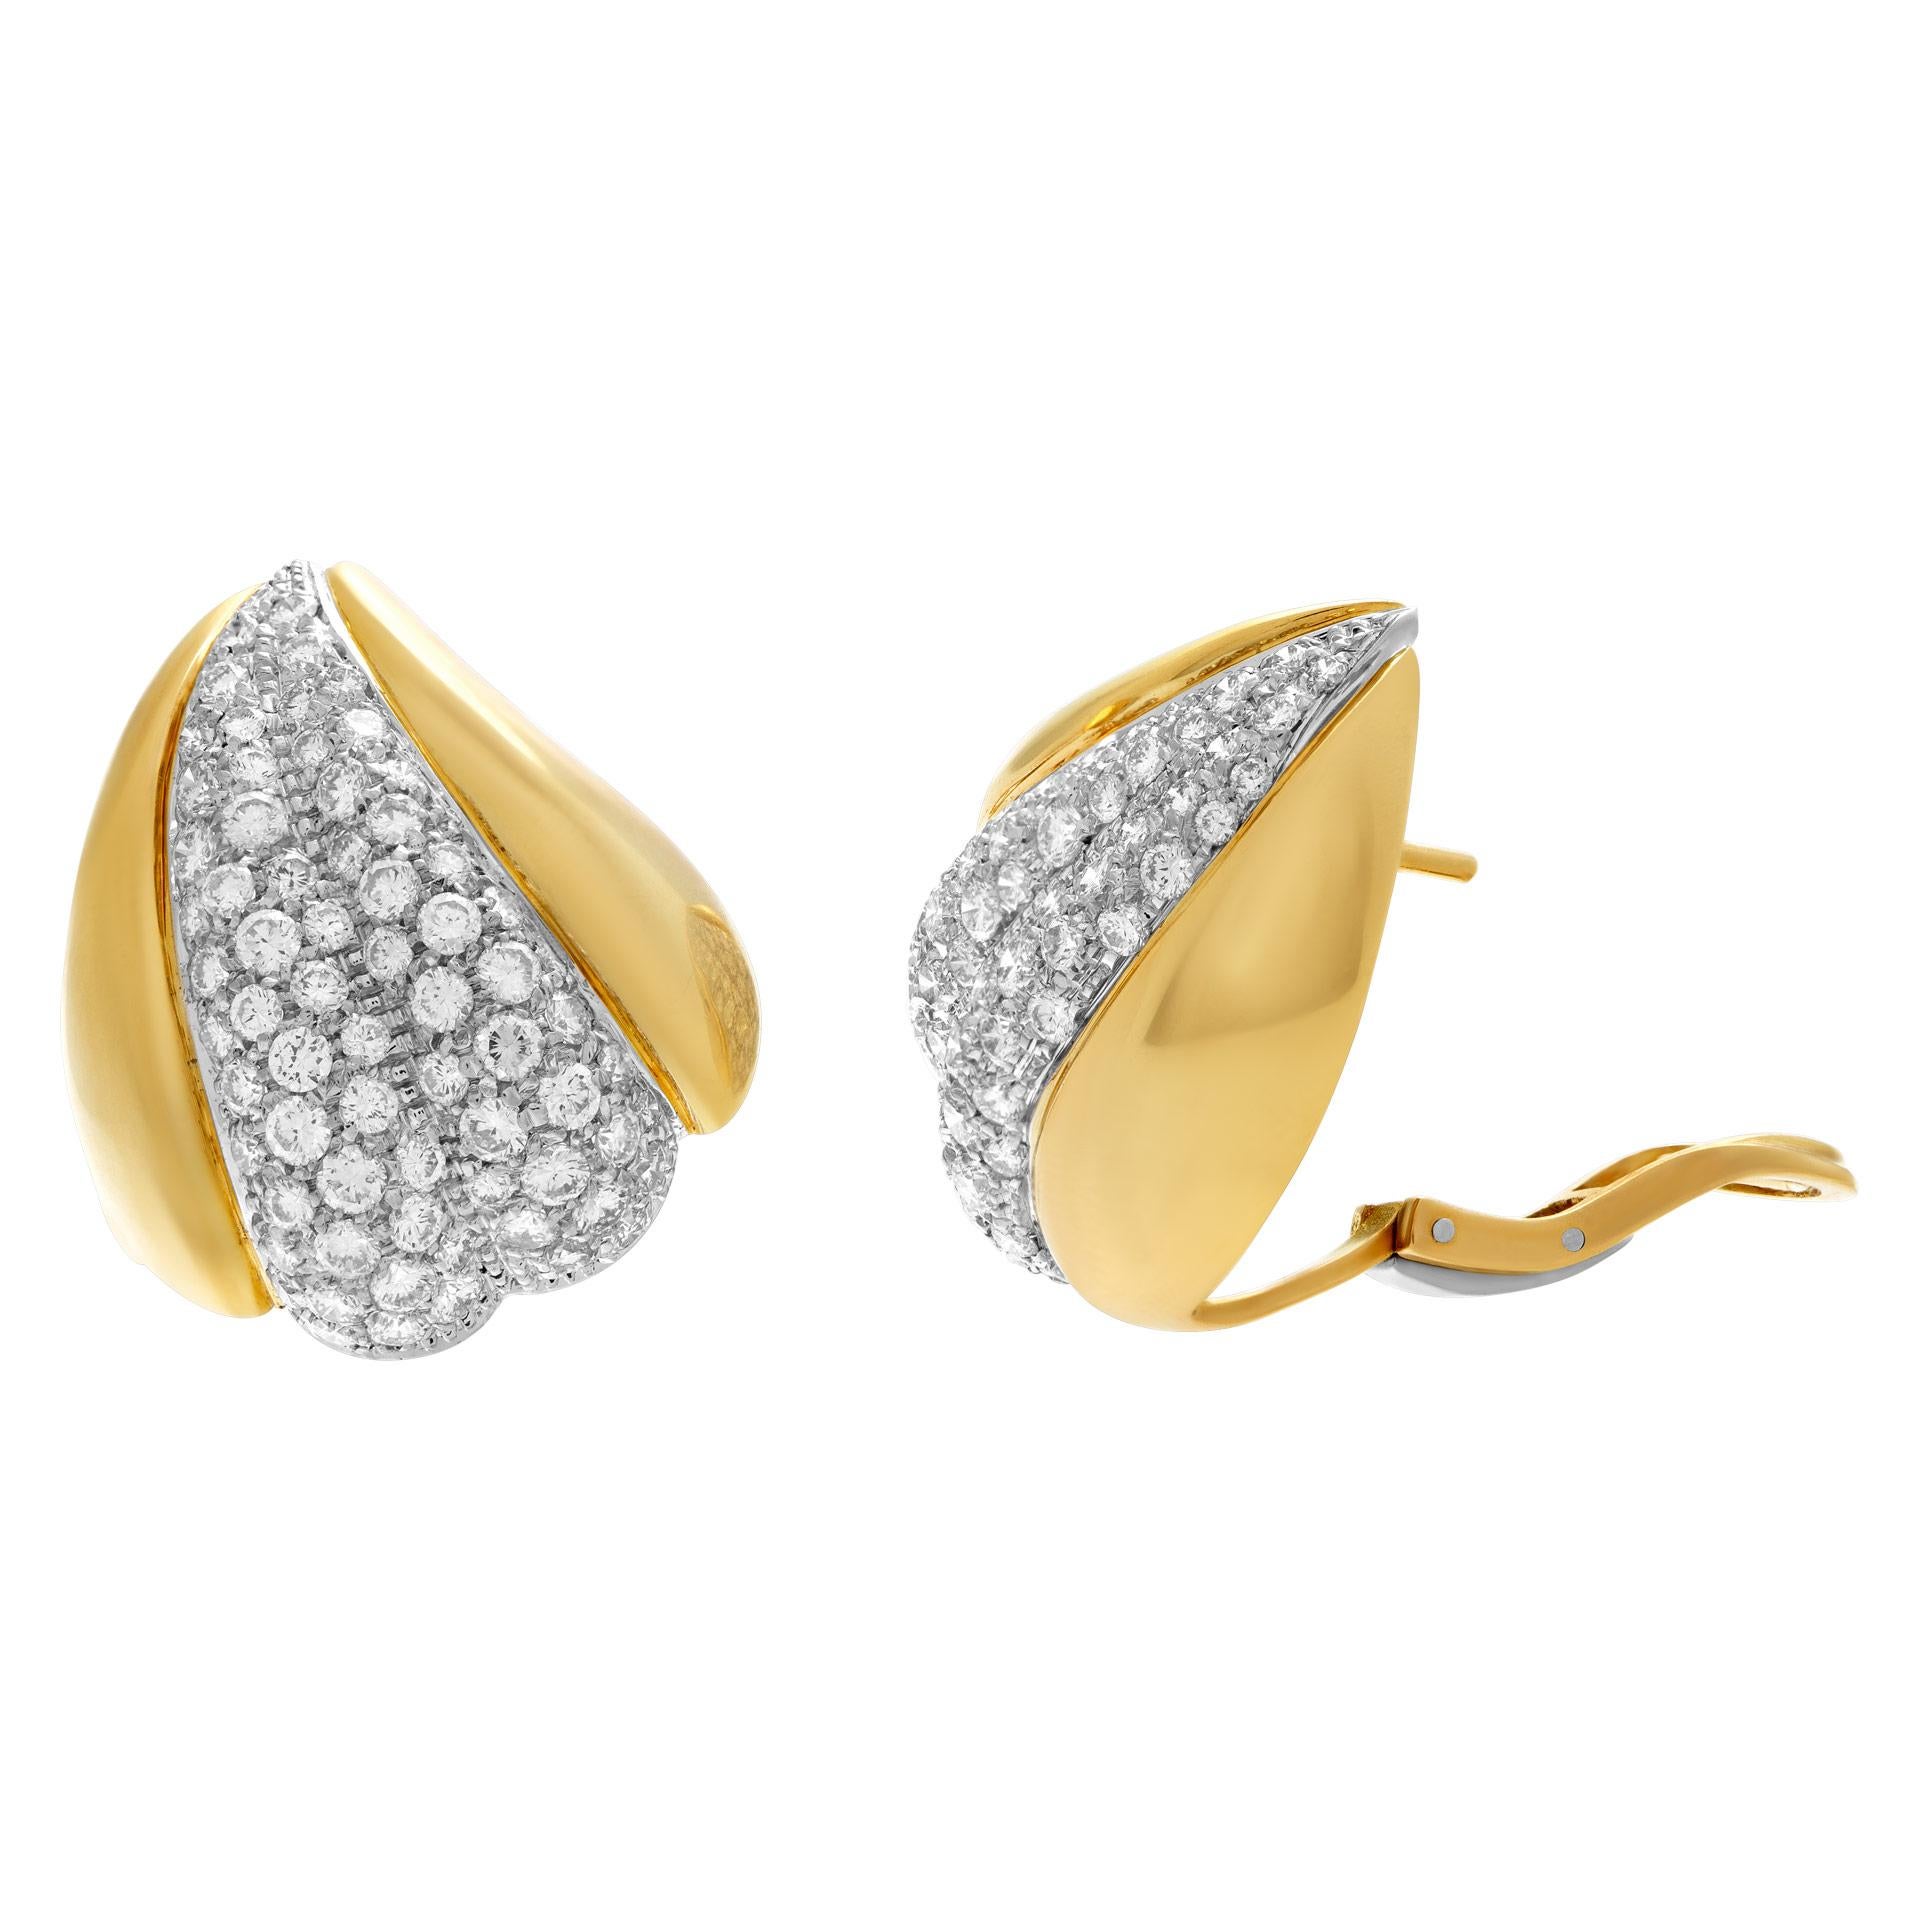 Striking leaf earrings set in 18k yellow gold with full cut round brilliant diamonds totaling over 2.15 carats. Diamonds estimate F-G color, VVS-VS clarity. Omega post backs.30 mm x 25mm (widest part).
